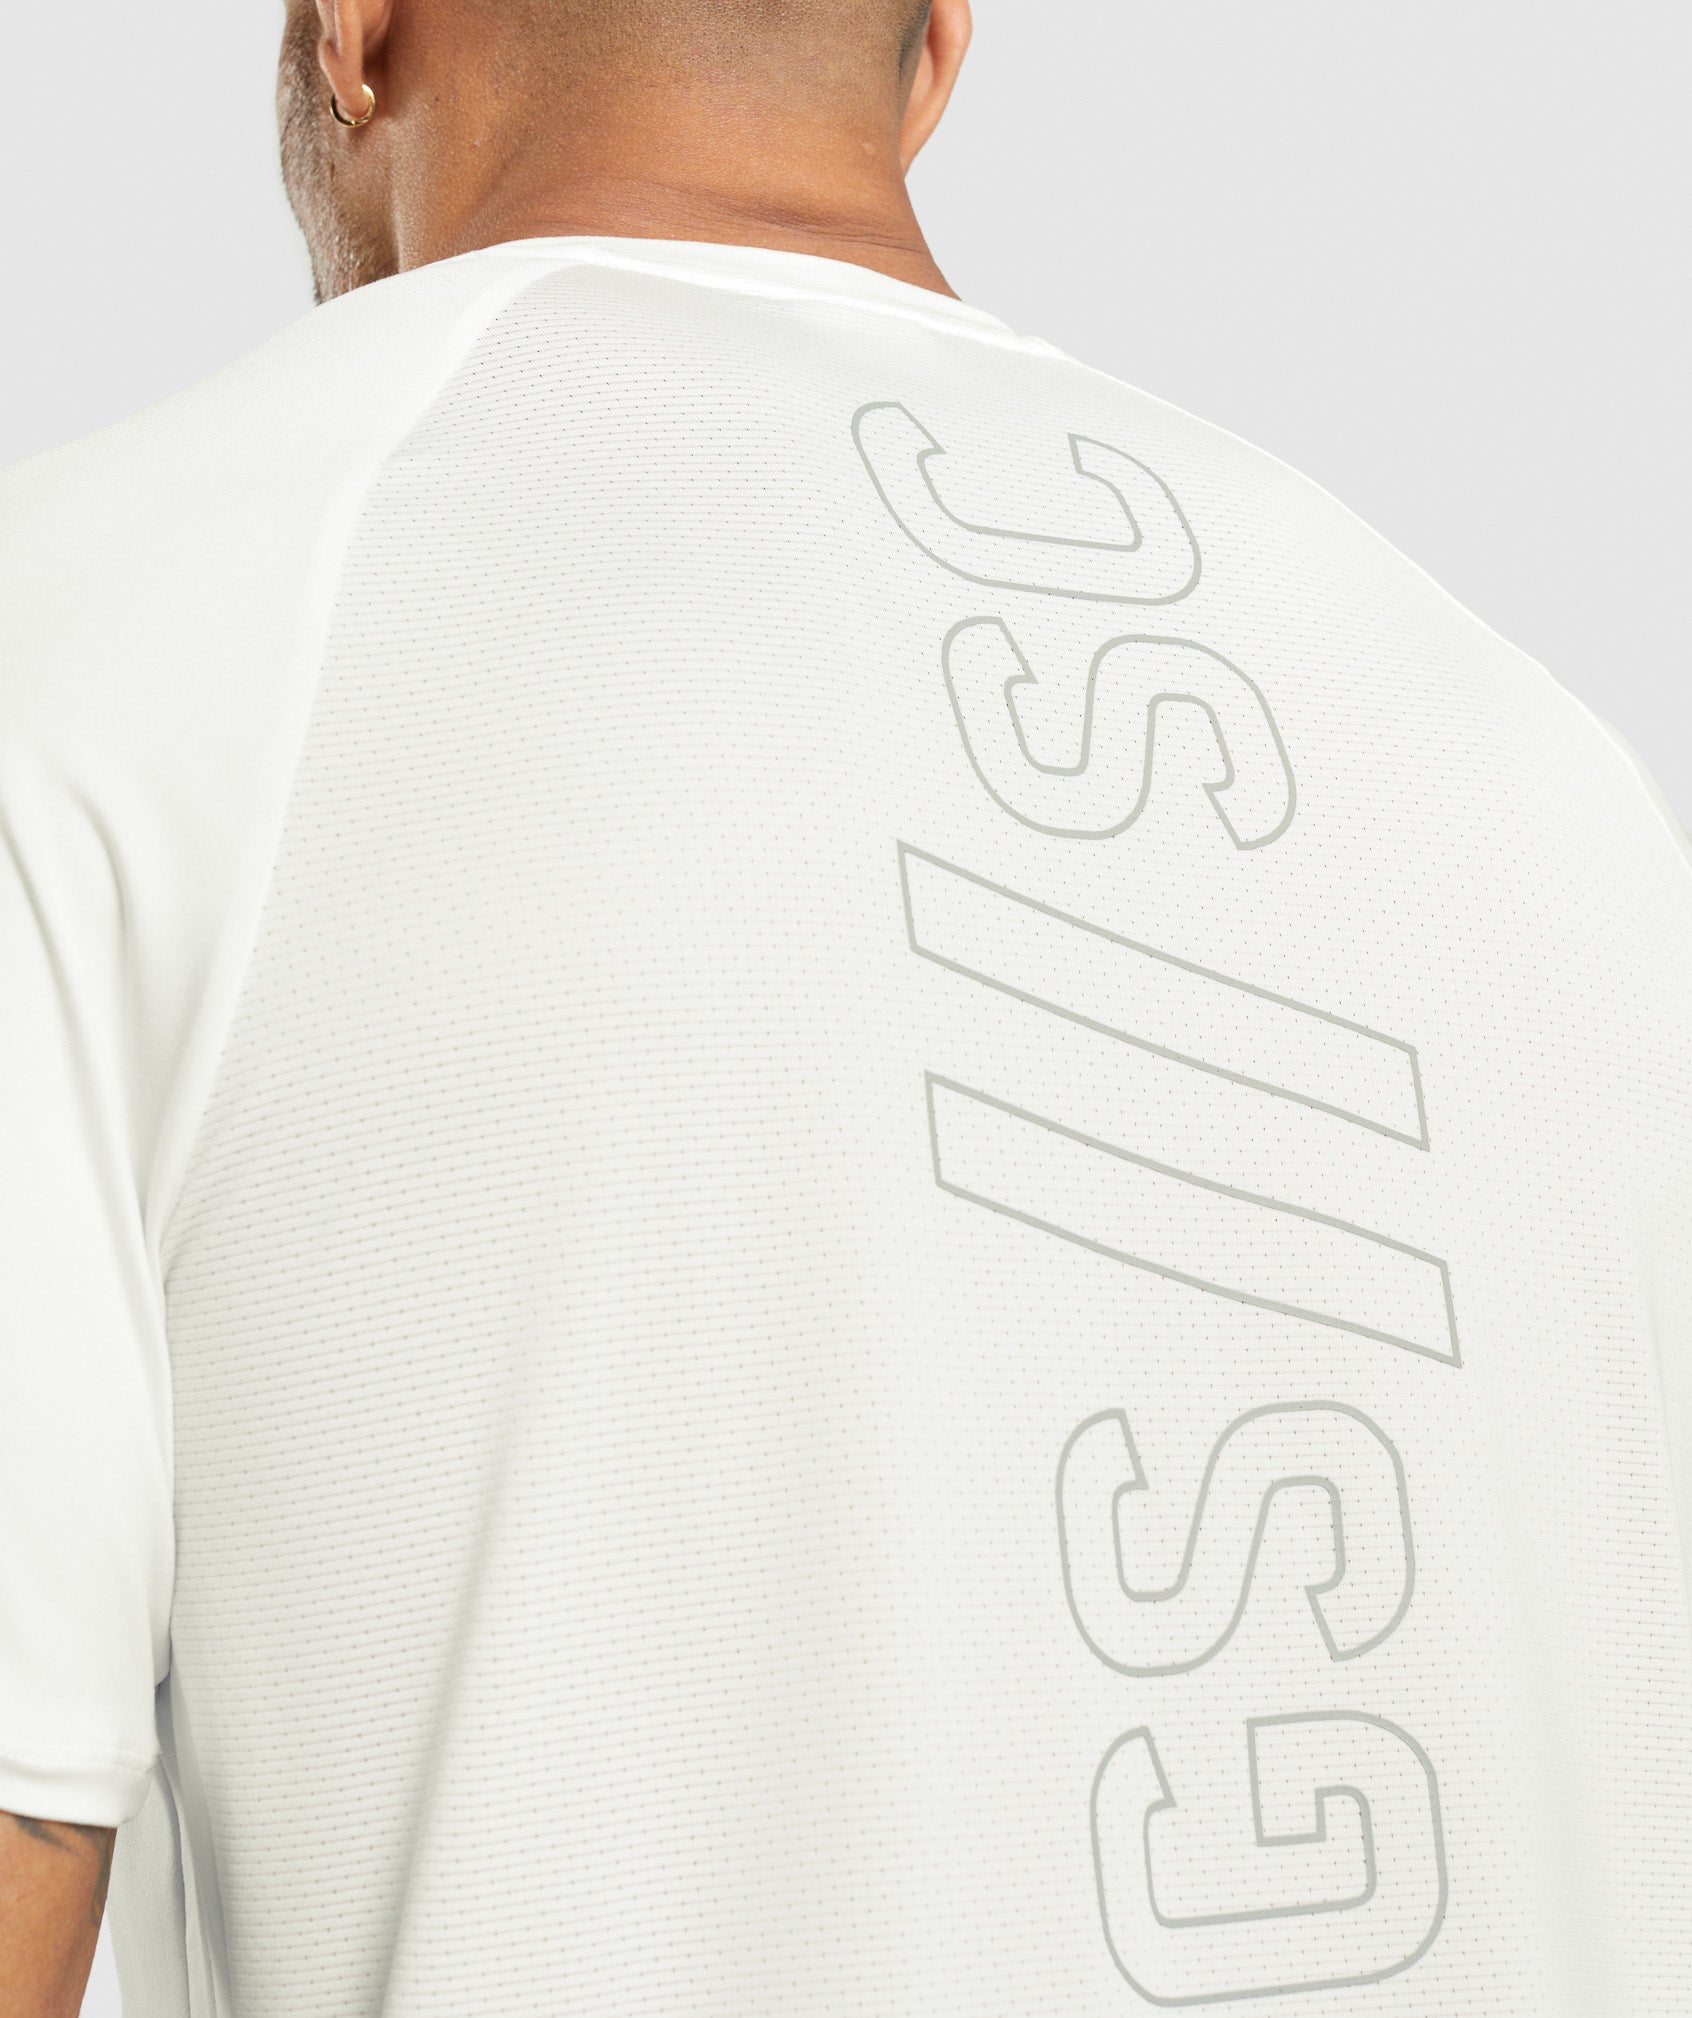 Gymshark//Steve Cook T-Shirt in Off White - view 5